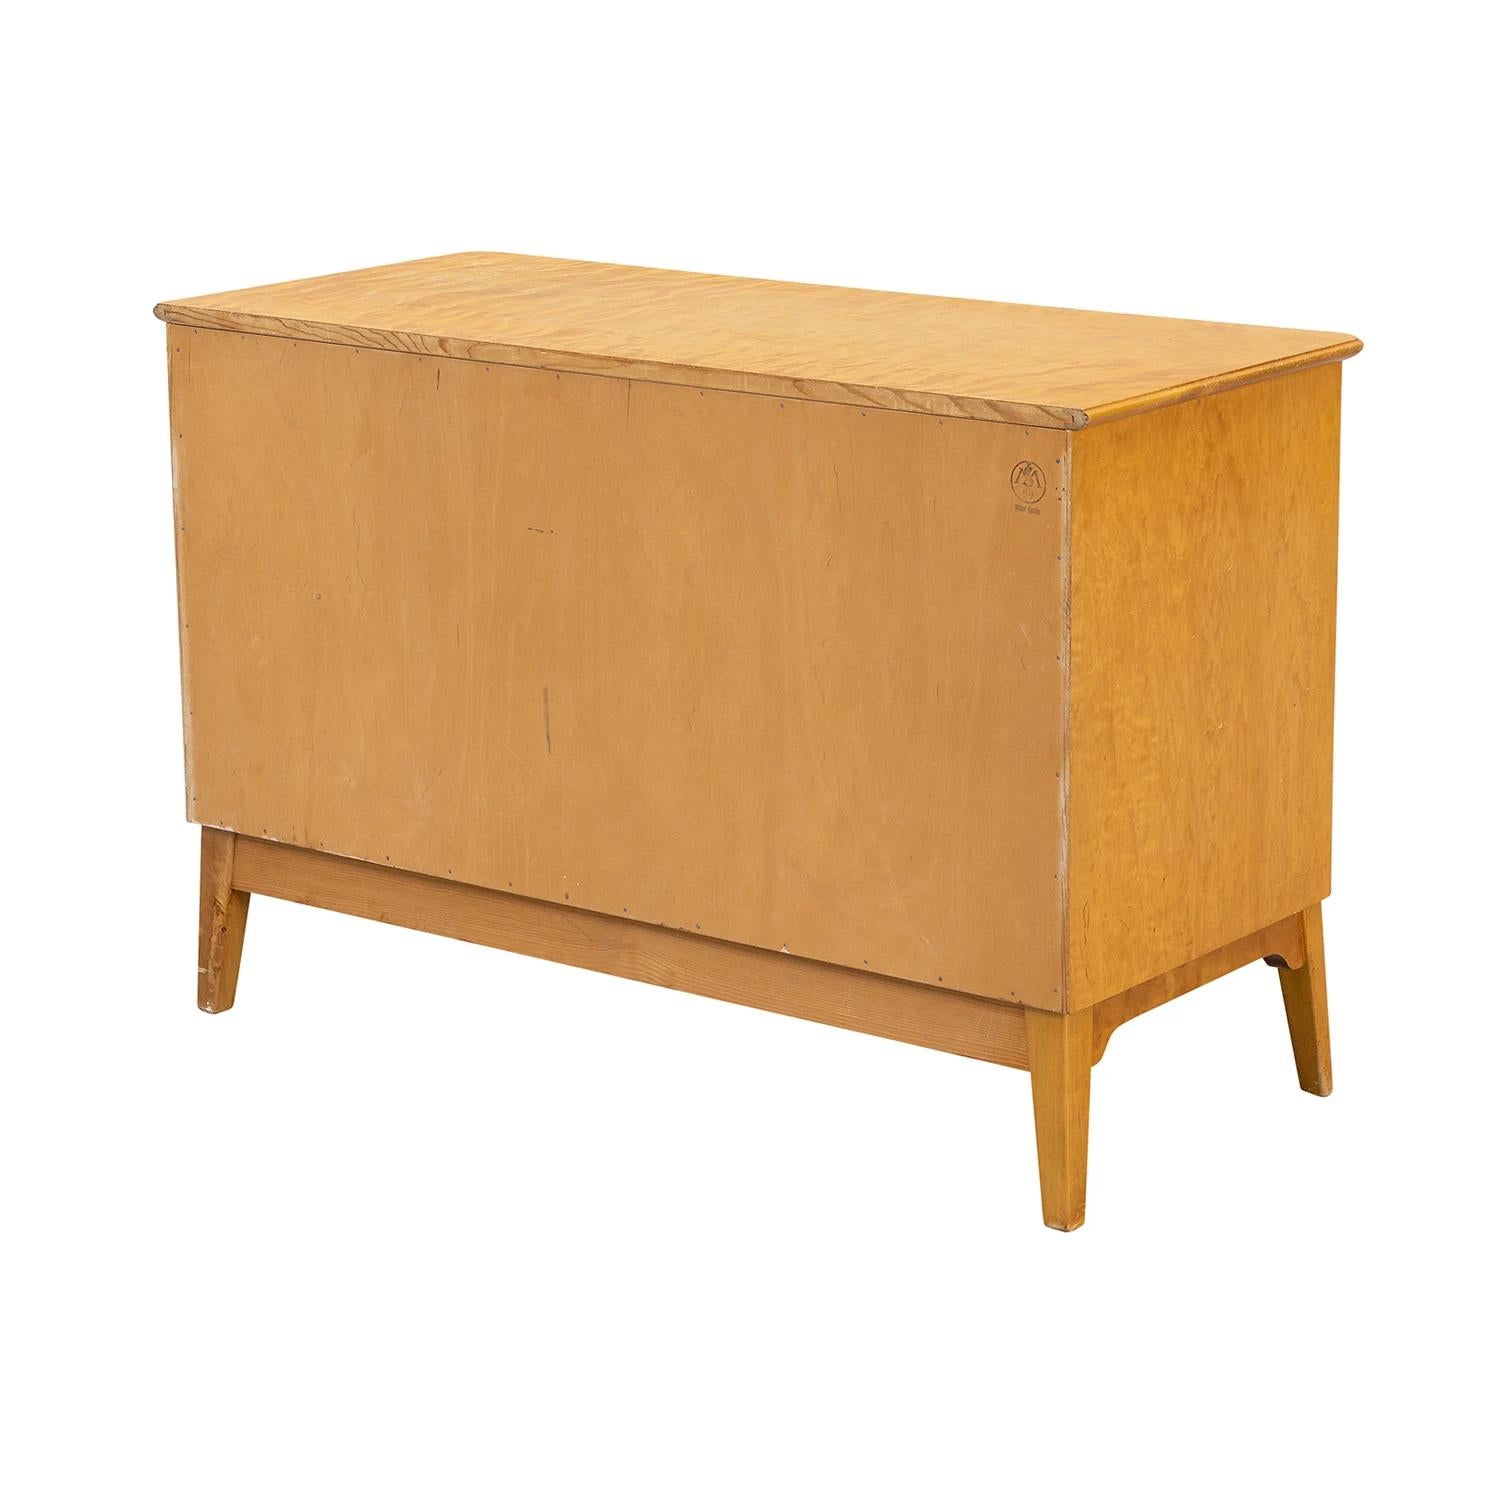 Hand-Carved 20th Century Swedish Birchwood Chest of Drawers by AB Åsundens Möbelfabrik For Sale